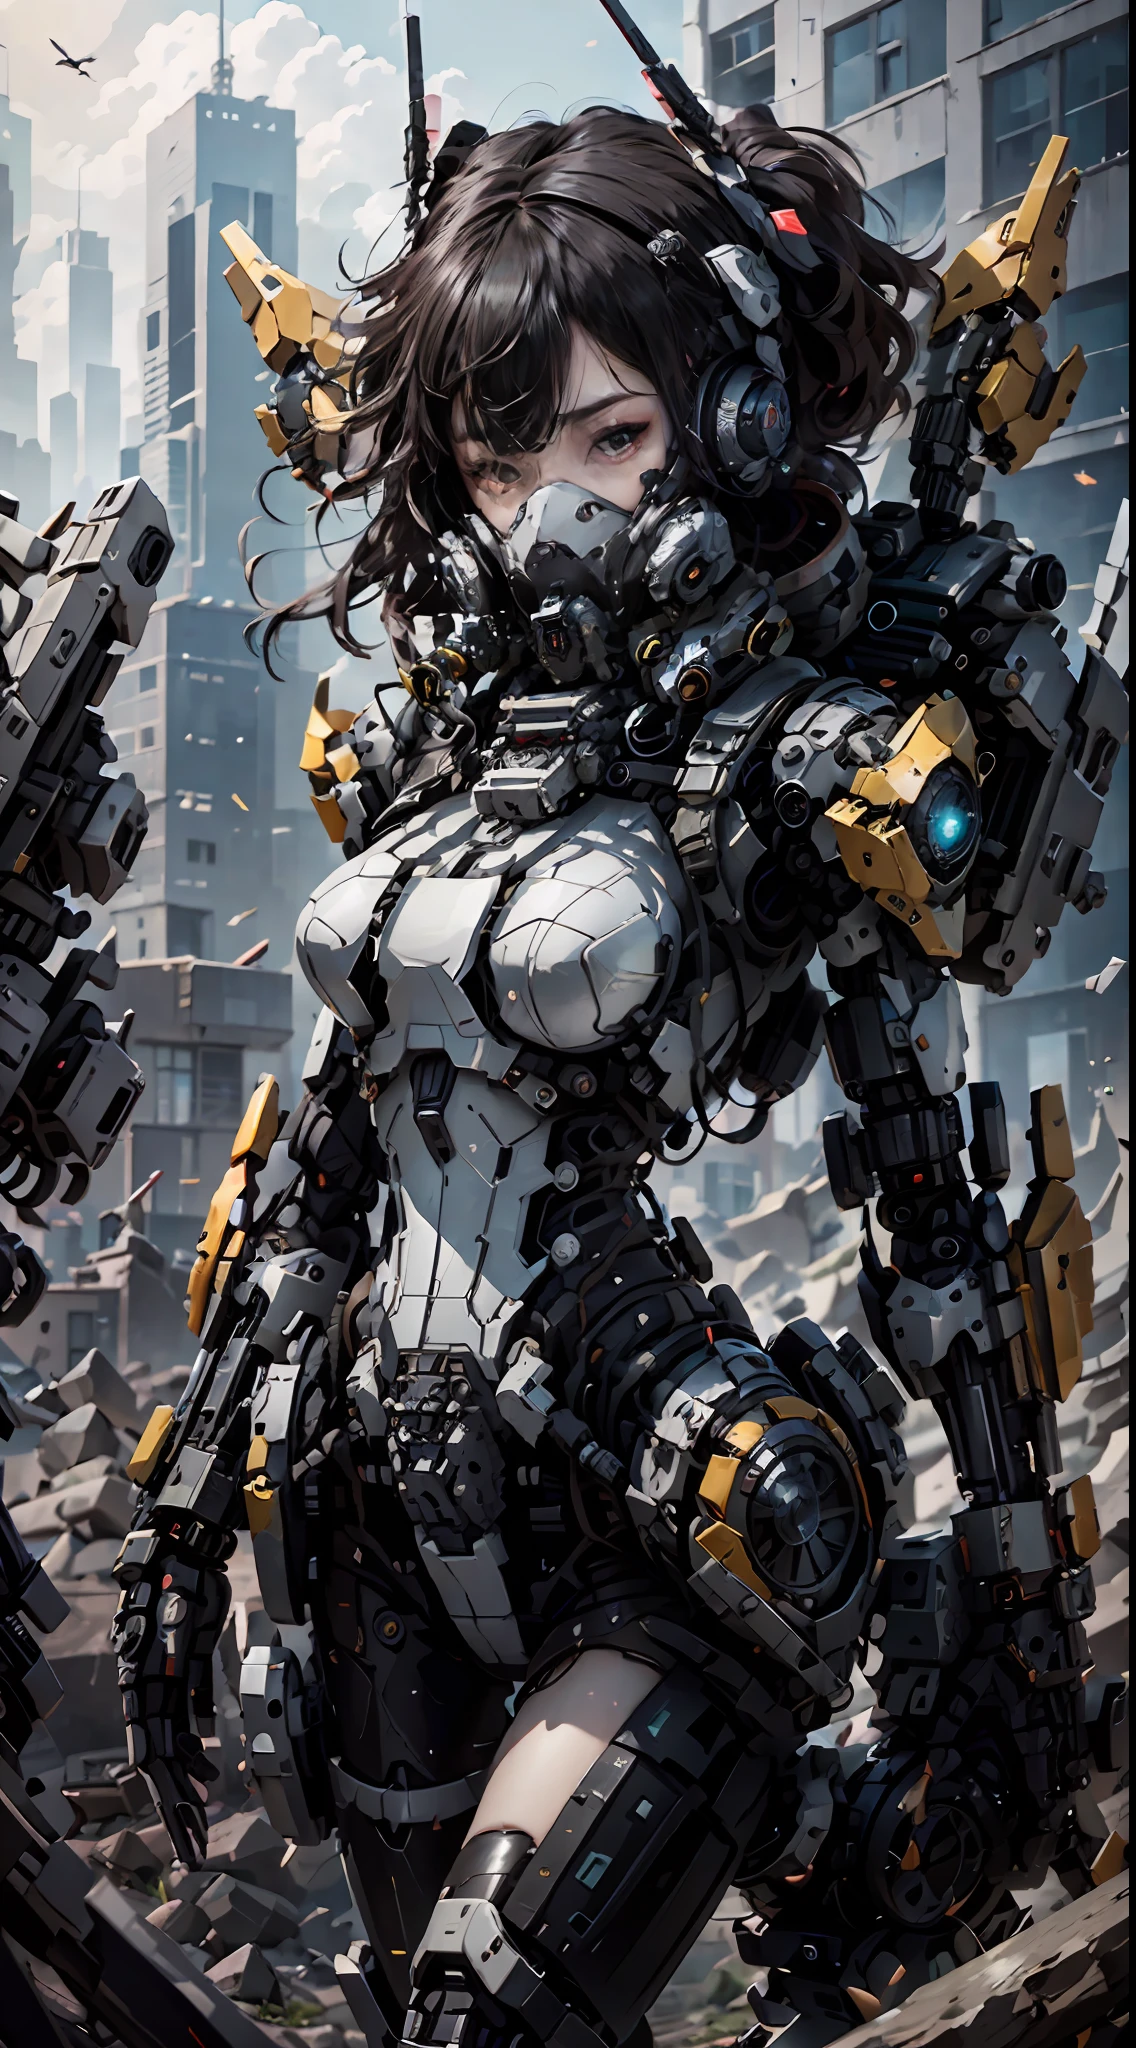 This is a CG Unity 8k wallpaper with ultra-detailed, high-resolution and top quality in cyberpunk style, dominated by black and red. In the picture, a beautiful girl with white messy short hair, a delicate face, wearing a steam mecha mask, standing on the ruins, behind her is a huge robot, and the action of a woman holding a heavy sniper rifle in her hand,